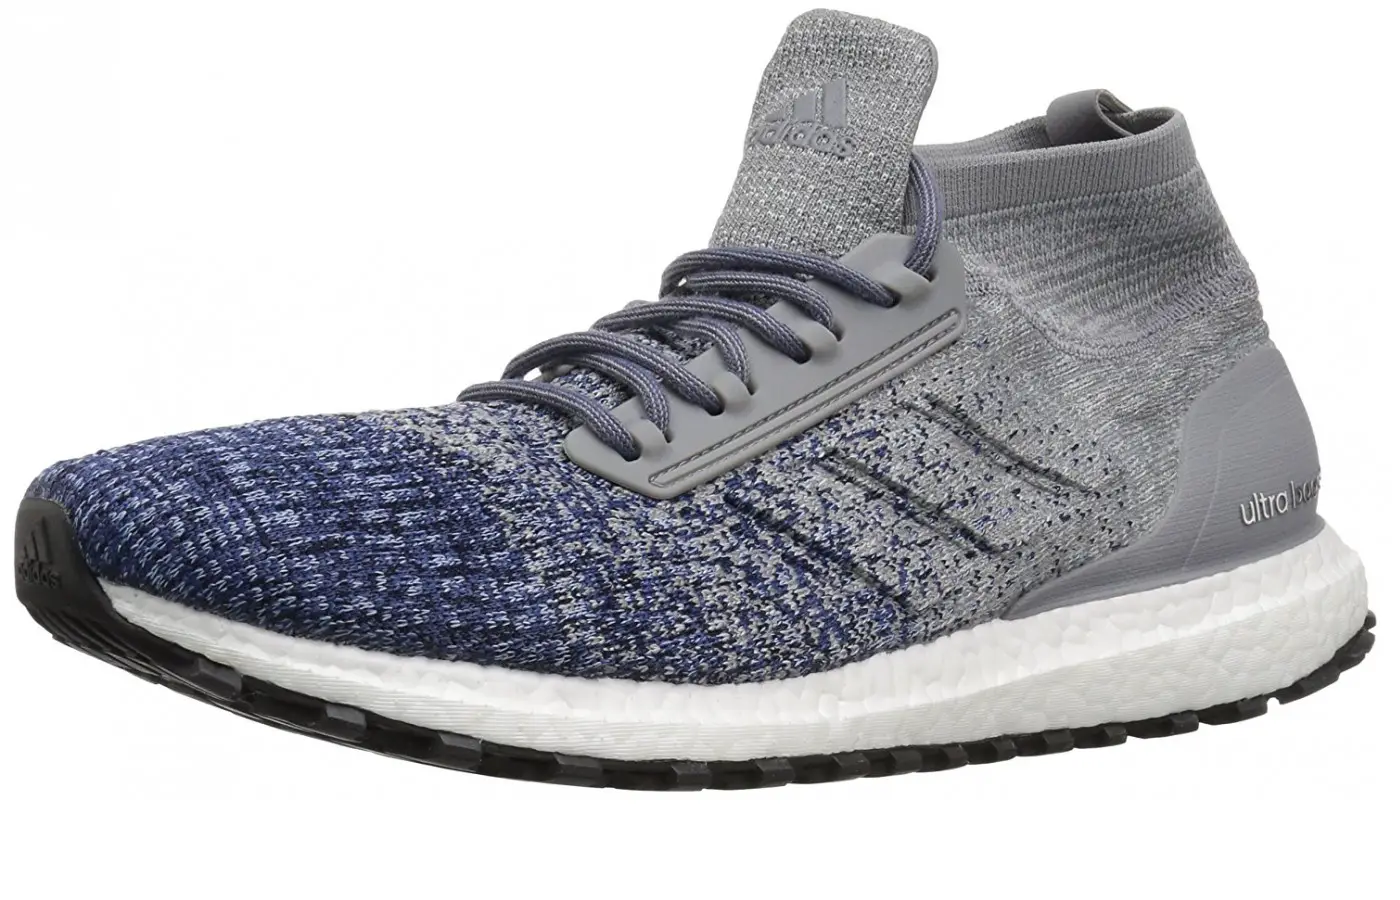 A side view of the Adidas Ultraboost All Terrains color scheme